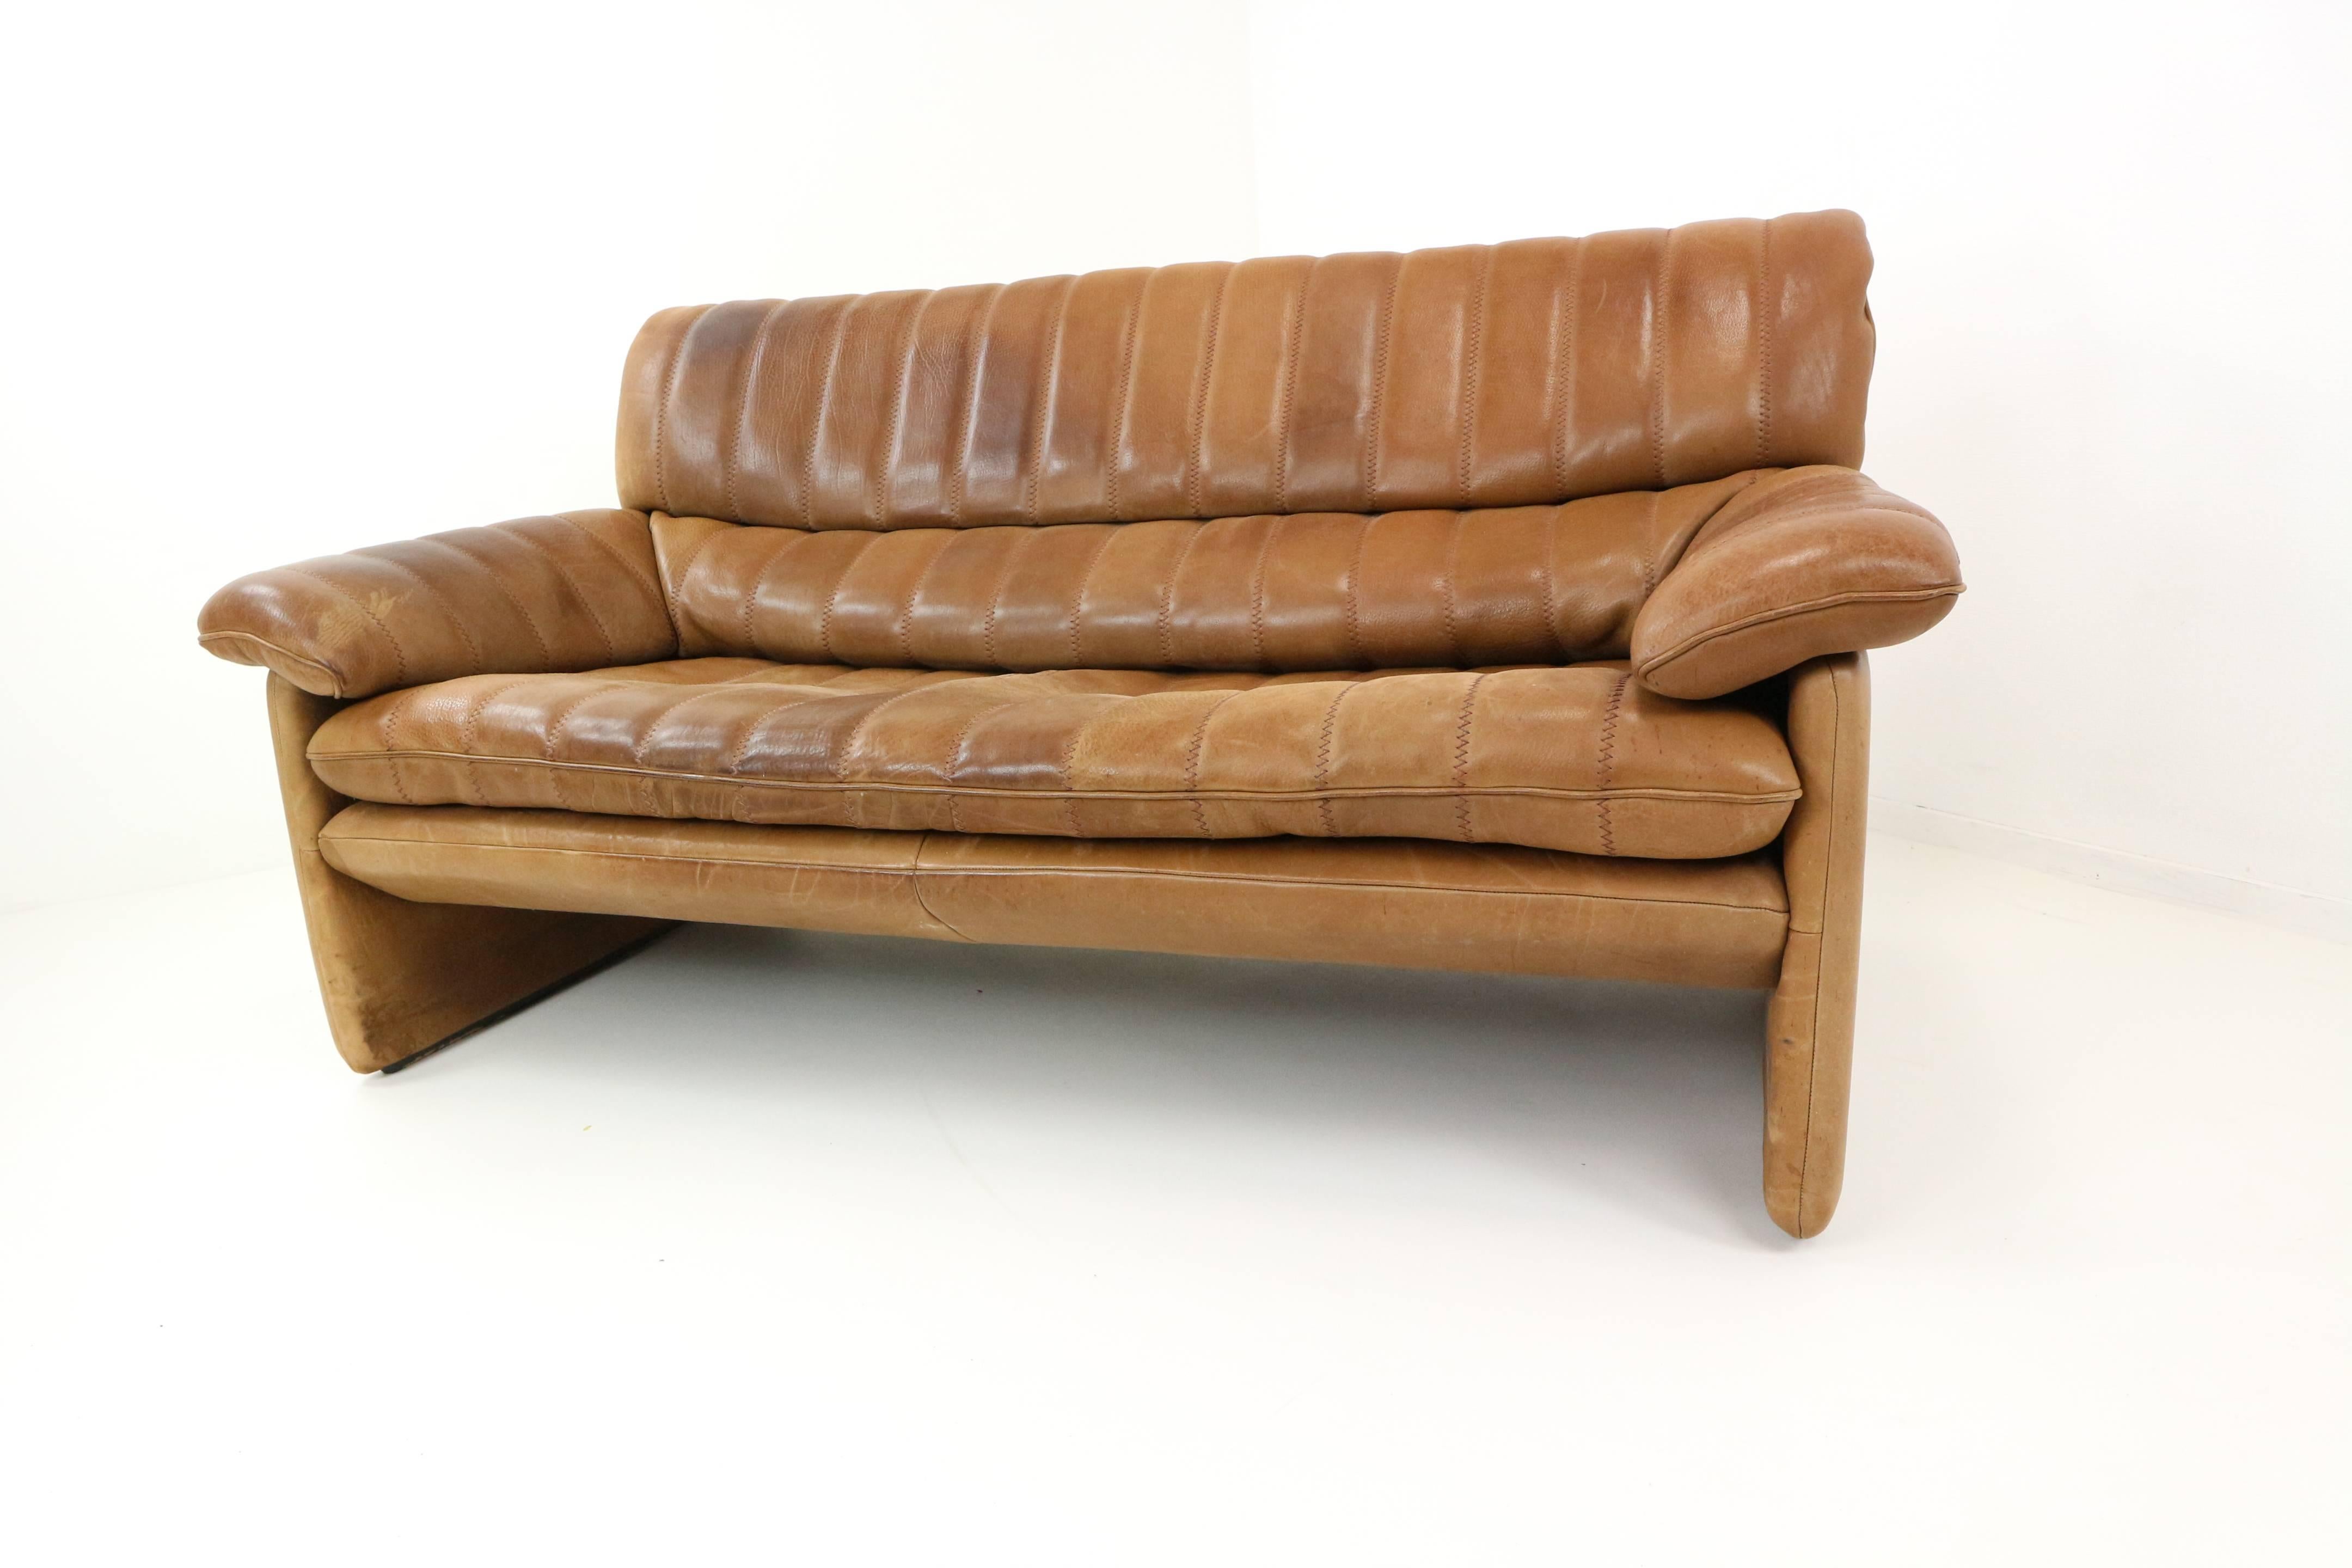 This DS-85 set is consisting of a chair, two-seat sofa and three-seat sofa. The sit-group was manufactured by De Sede in Switzerland in the 1970s. It is upholstered in cognac-colored buffalo leather, the thickest leather in the De Sede collection,